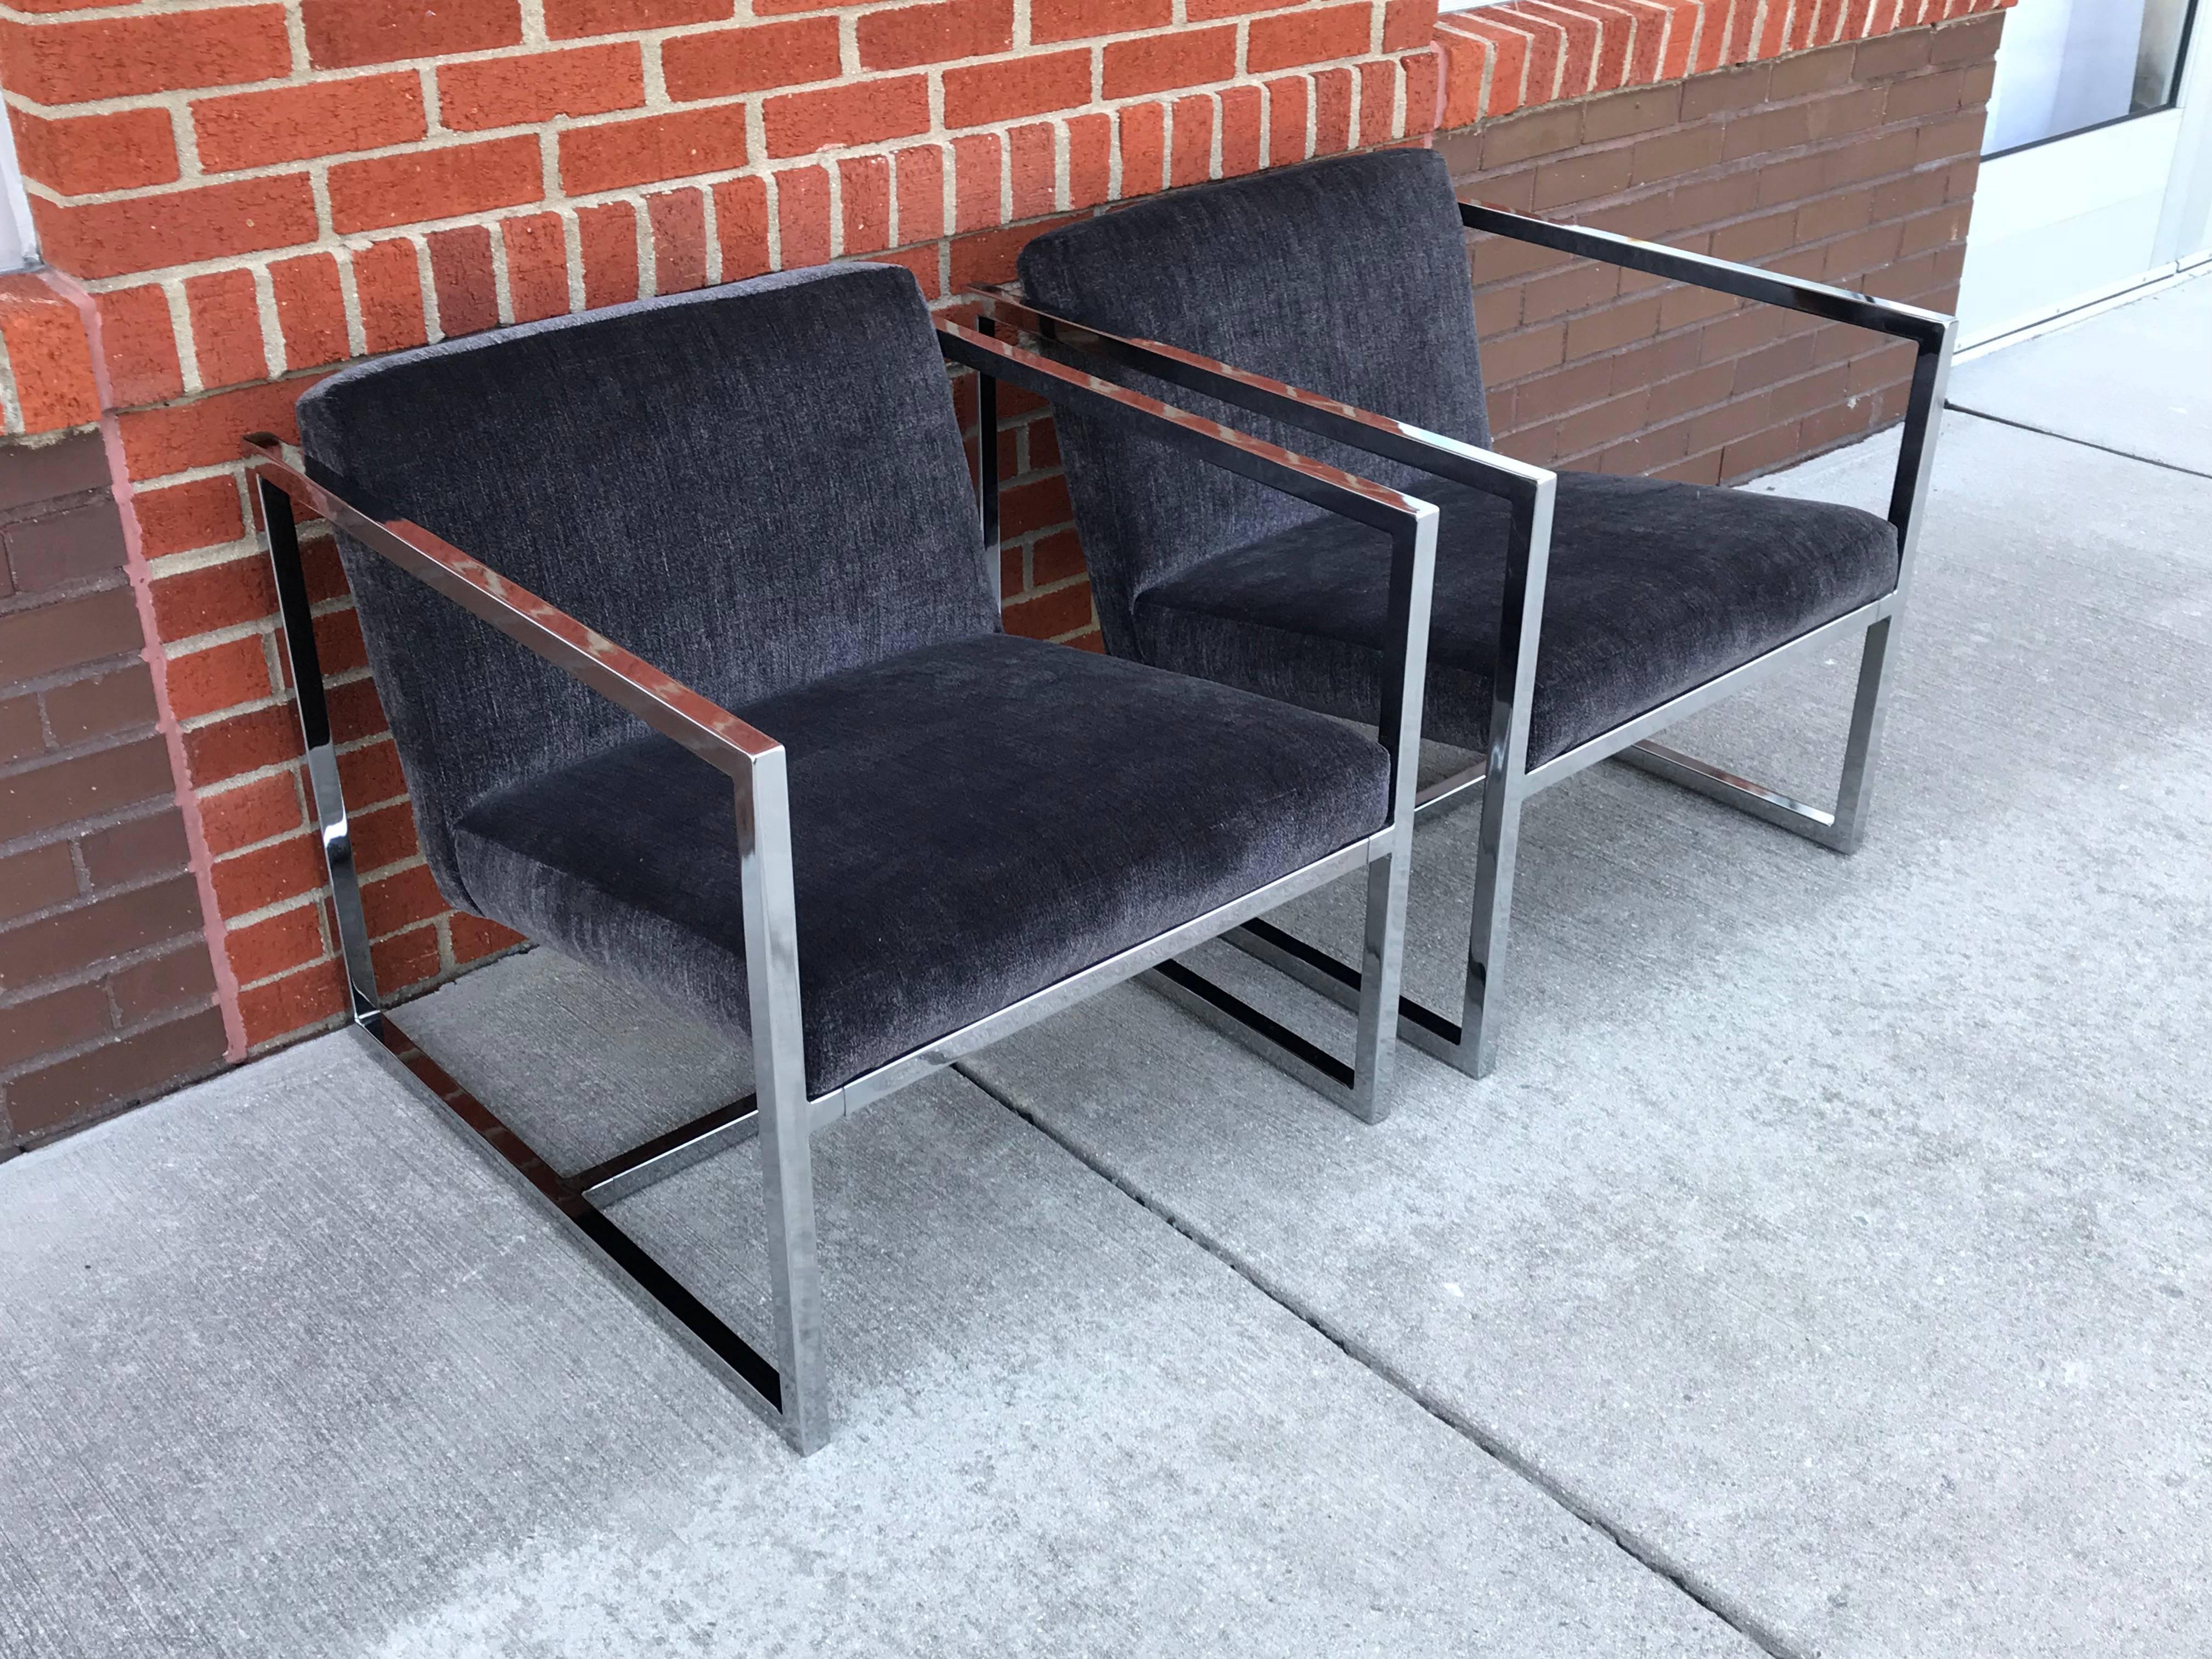 Offered is a fabulous, pair of 1980s Milo Baughman style polished-chrome cube chairs. The pair have been newly reupholstered in a gray Scalamandre velvet. Professional upholstery included new foam too. Heavy. Measure: Arm height is 23in.